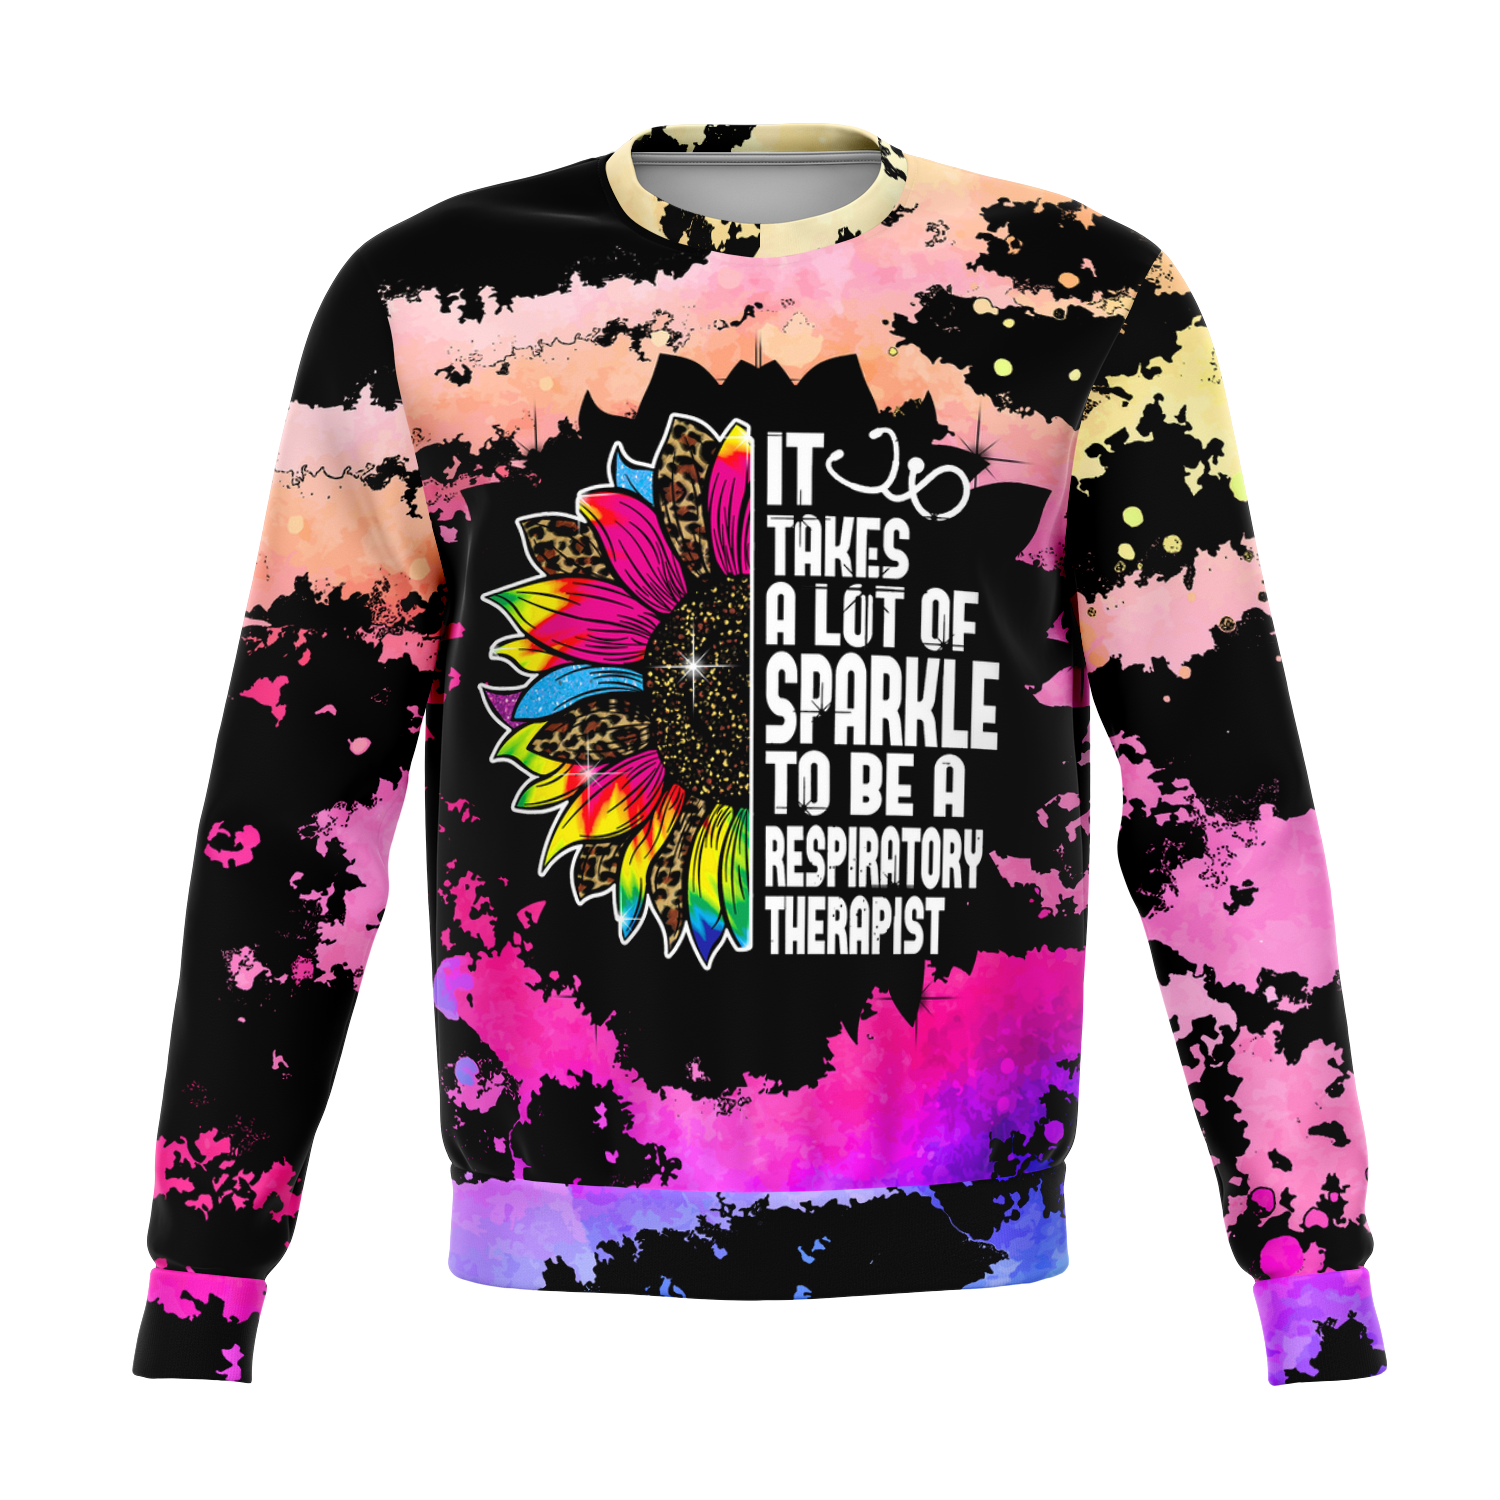 It Takes A Lot of Sparkle To Be a Respiratory Therapist Sweatshirt Front